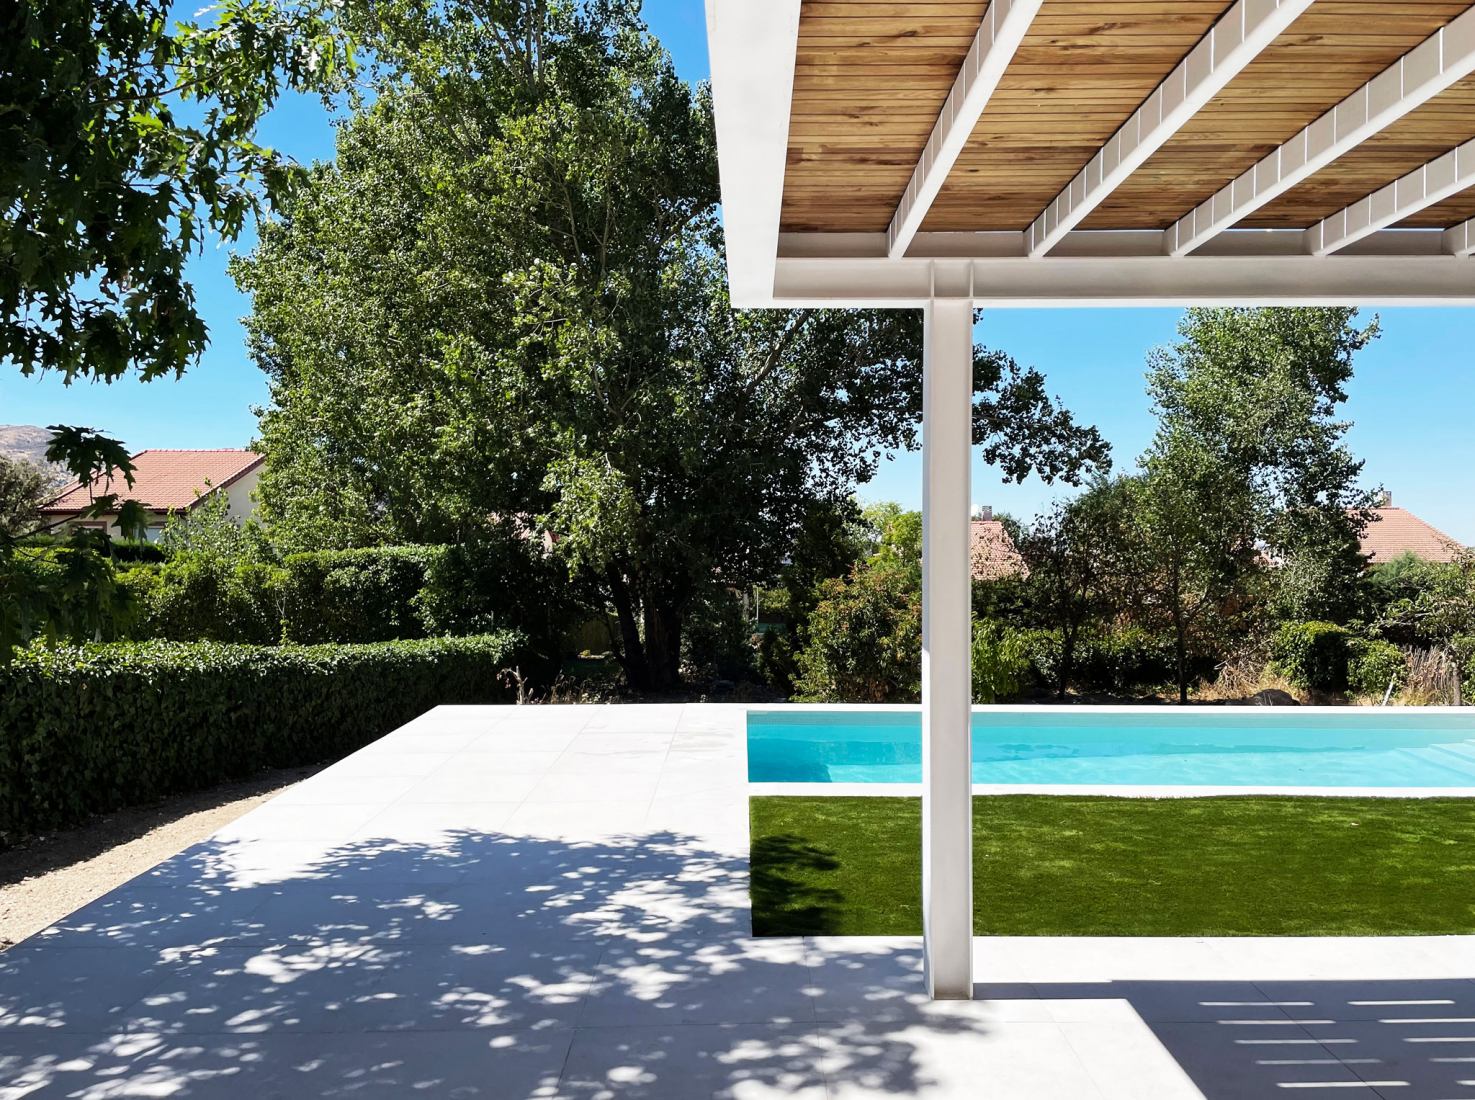 Swimming pool and Terrace Reconditioning by FAR Arquitectos. Photograph by Francisco Arévalo